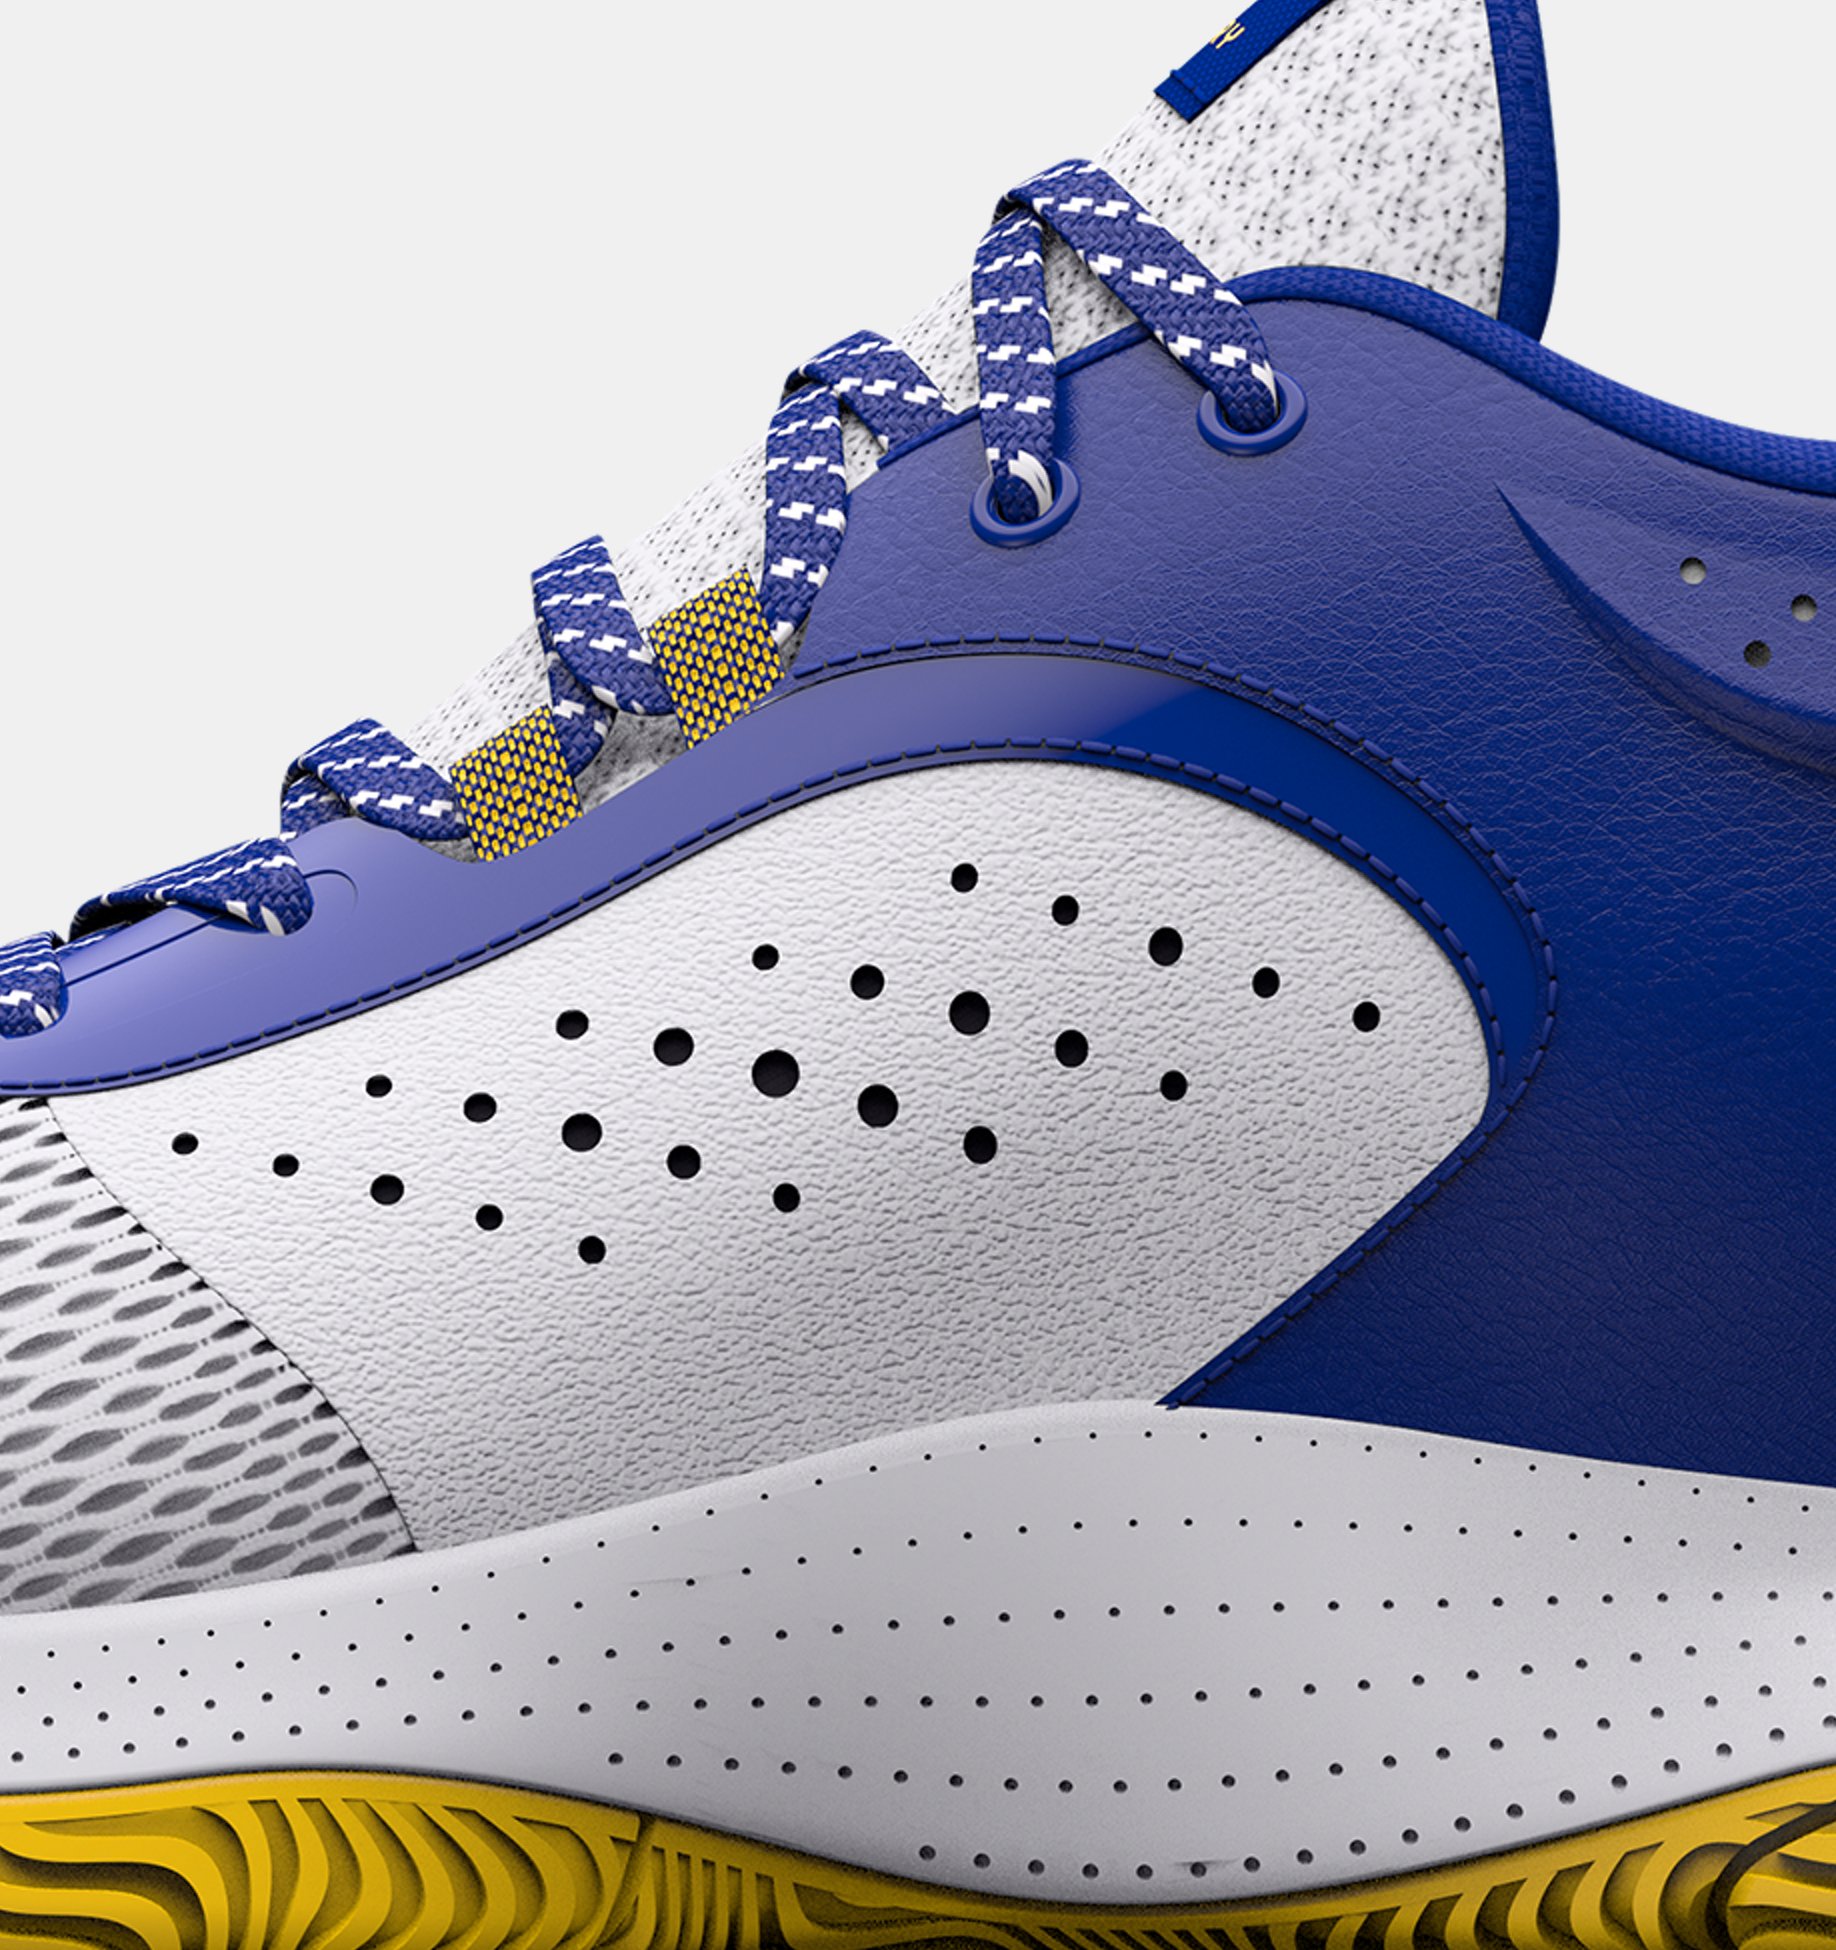 Unisex Curry Shoes Under Armour